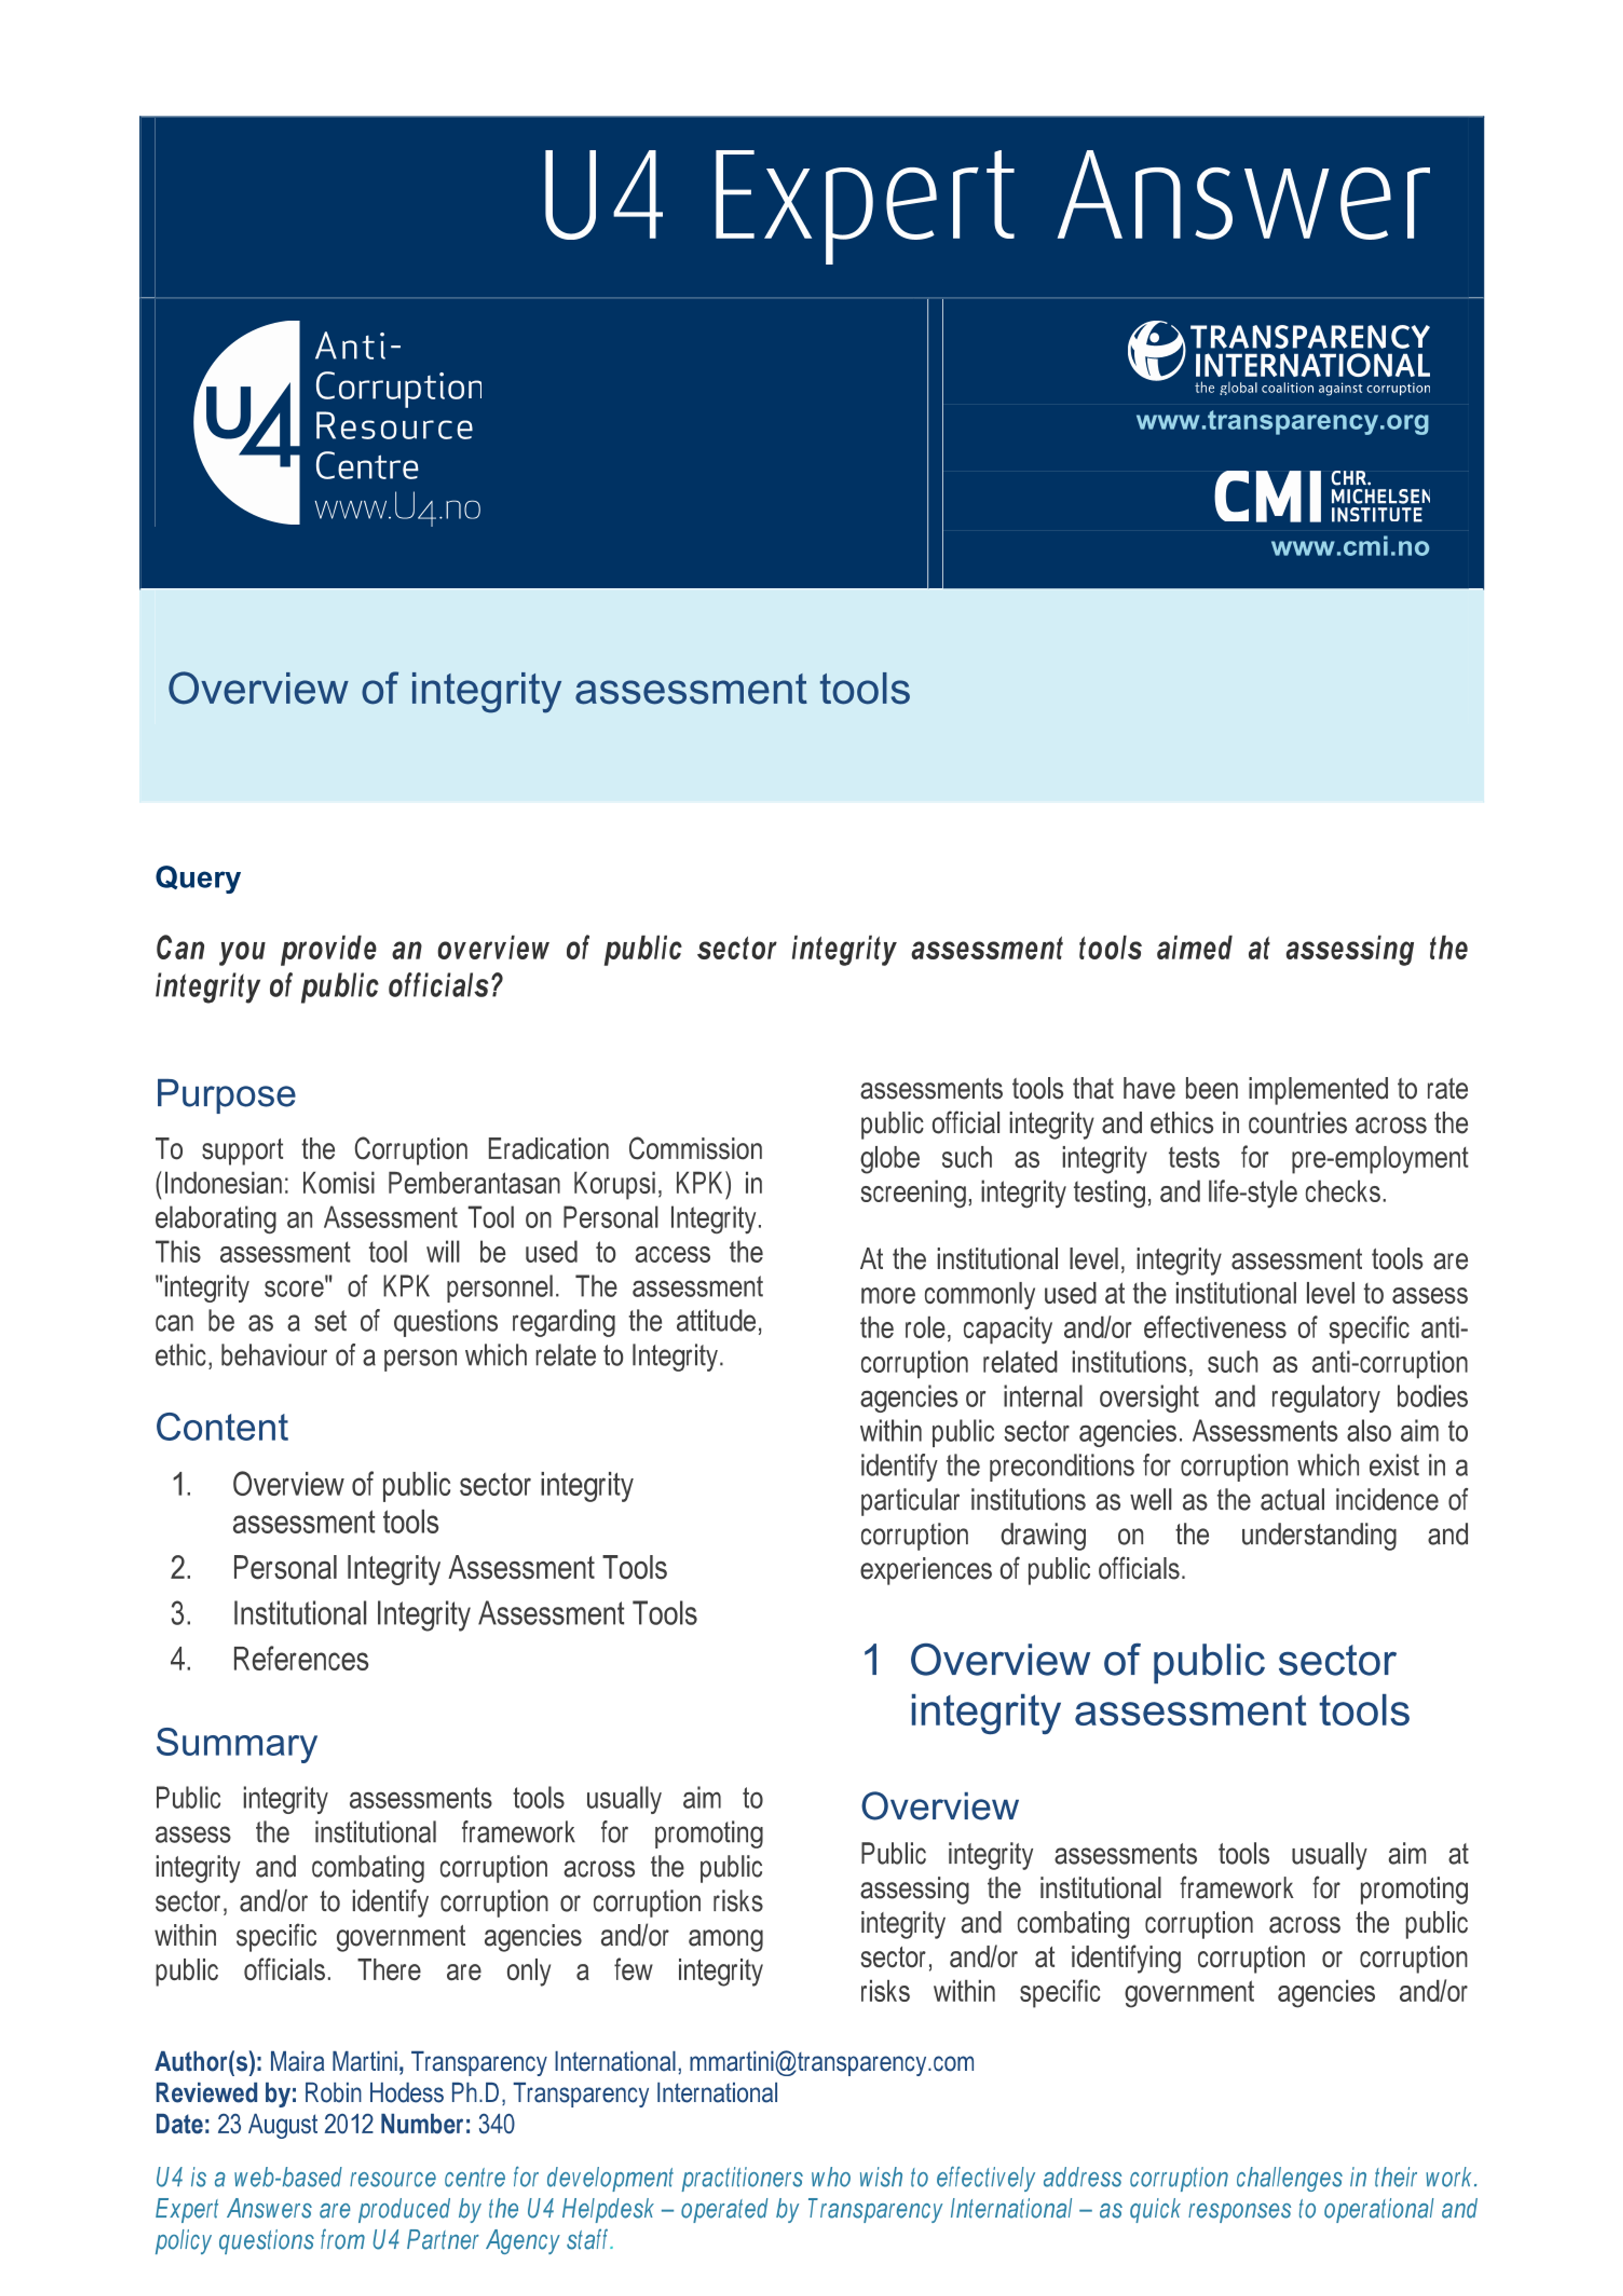 Overview of integrity assessment tools